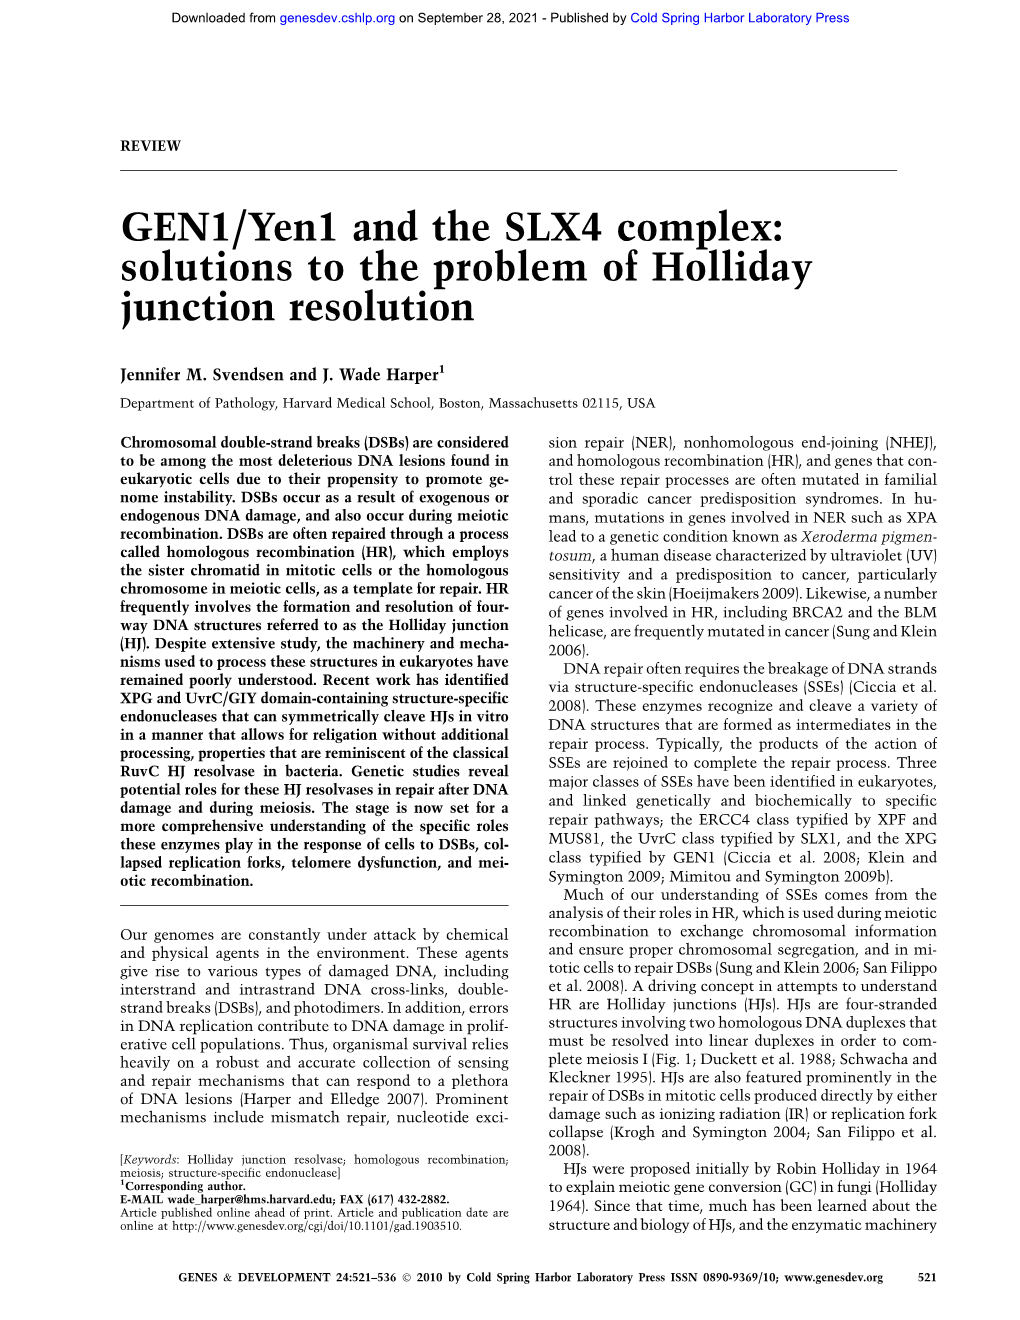 GEN1/Yen1 and the SLX4 Complex: Solutions to the Problem of Holliday Junction Resolution